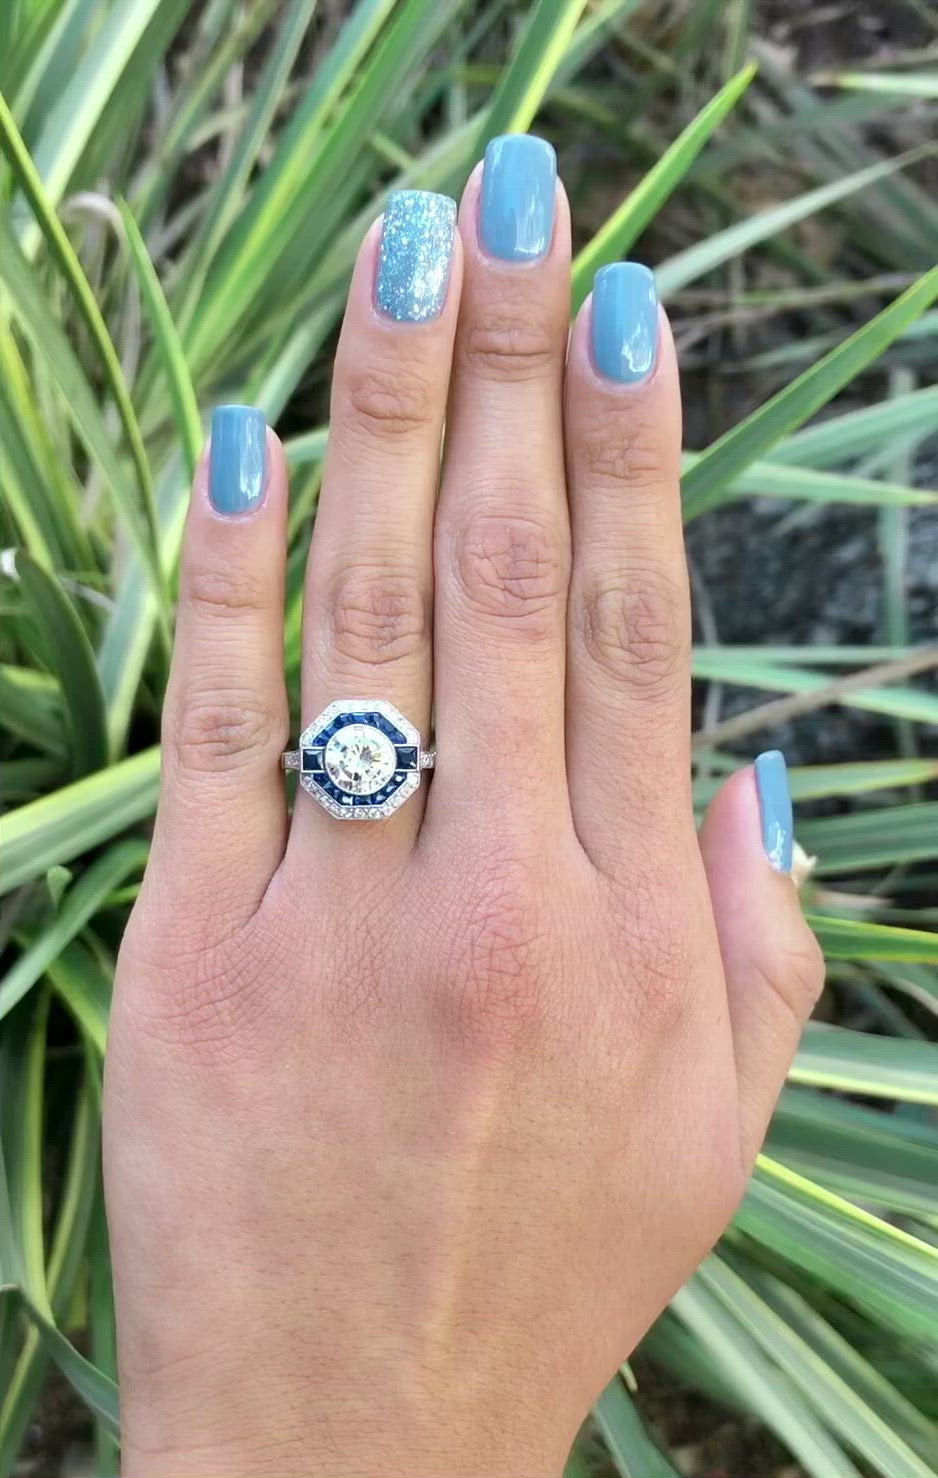 A stunning, large 2 carat diamond set in a blue sapphire octagon engagement ring.